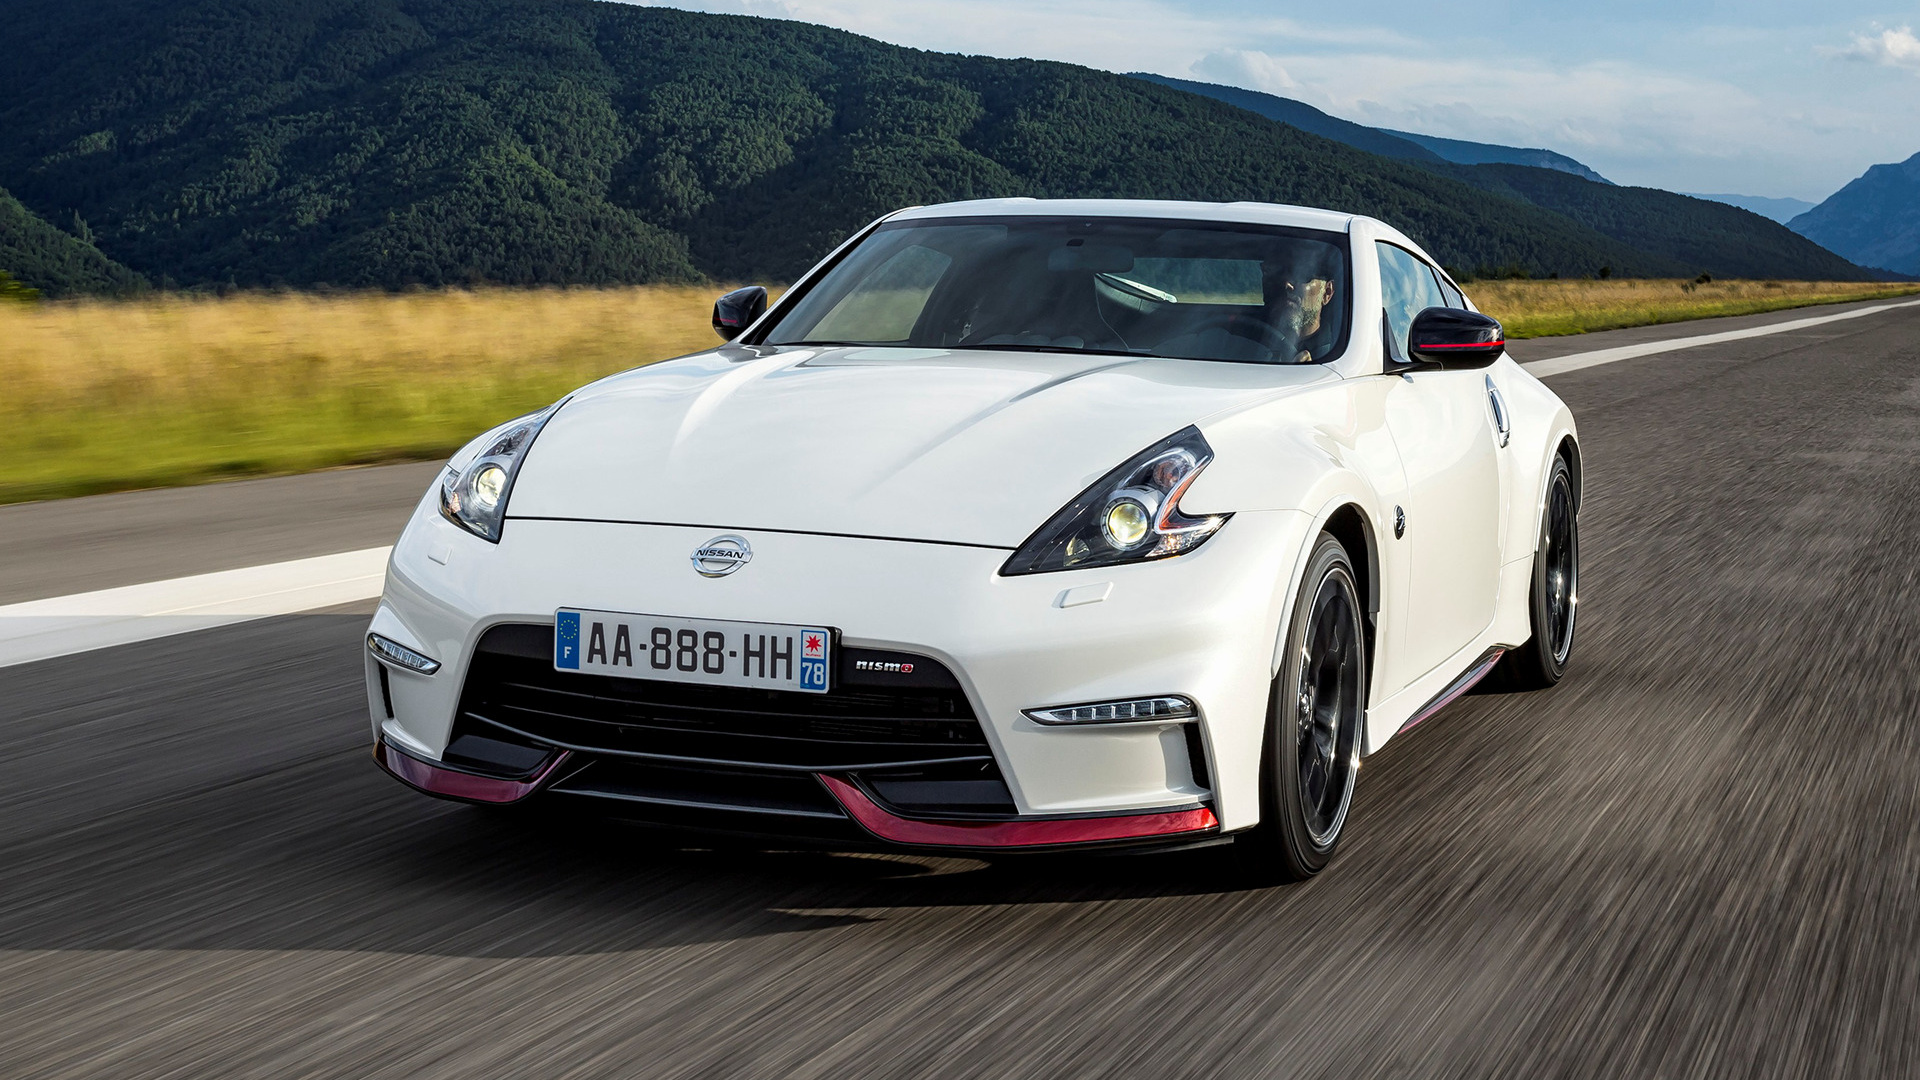 Nissan 370Z Nismo 2014 Wallpapers and HD Images   Car Pixel